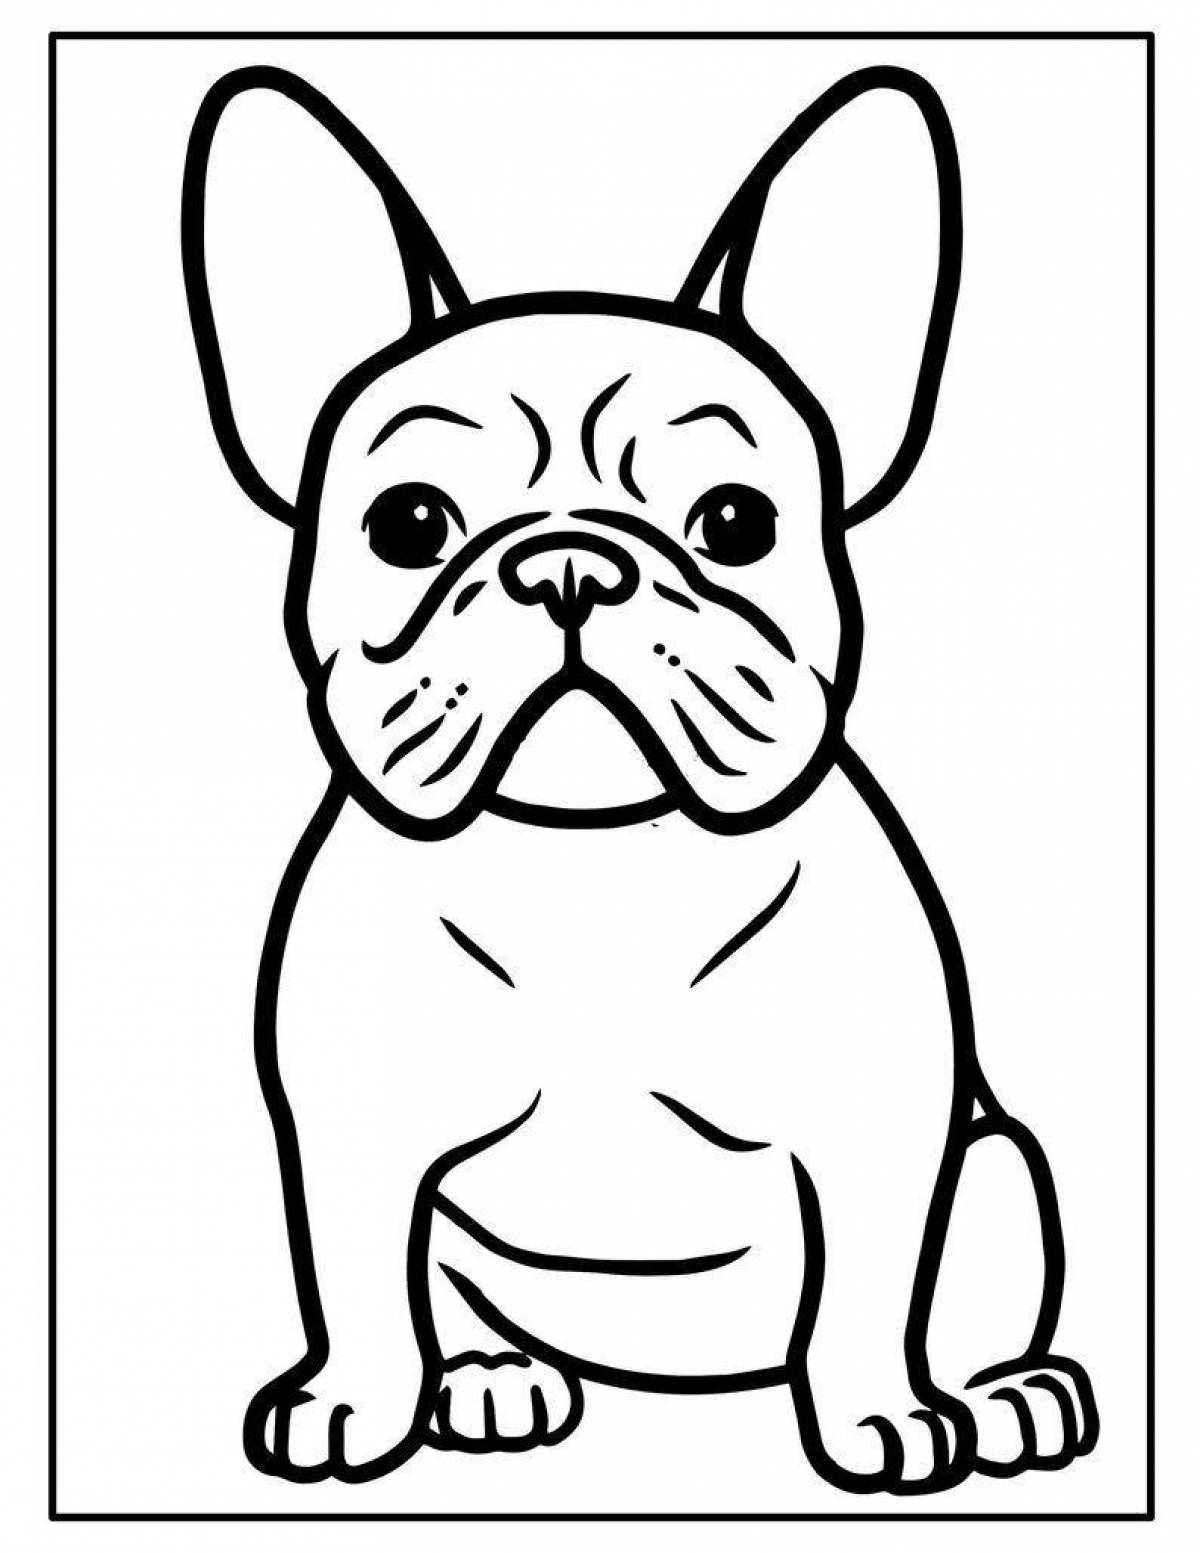 Smiling bulldog coloring page for kids